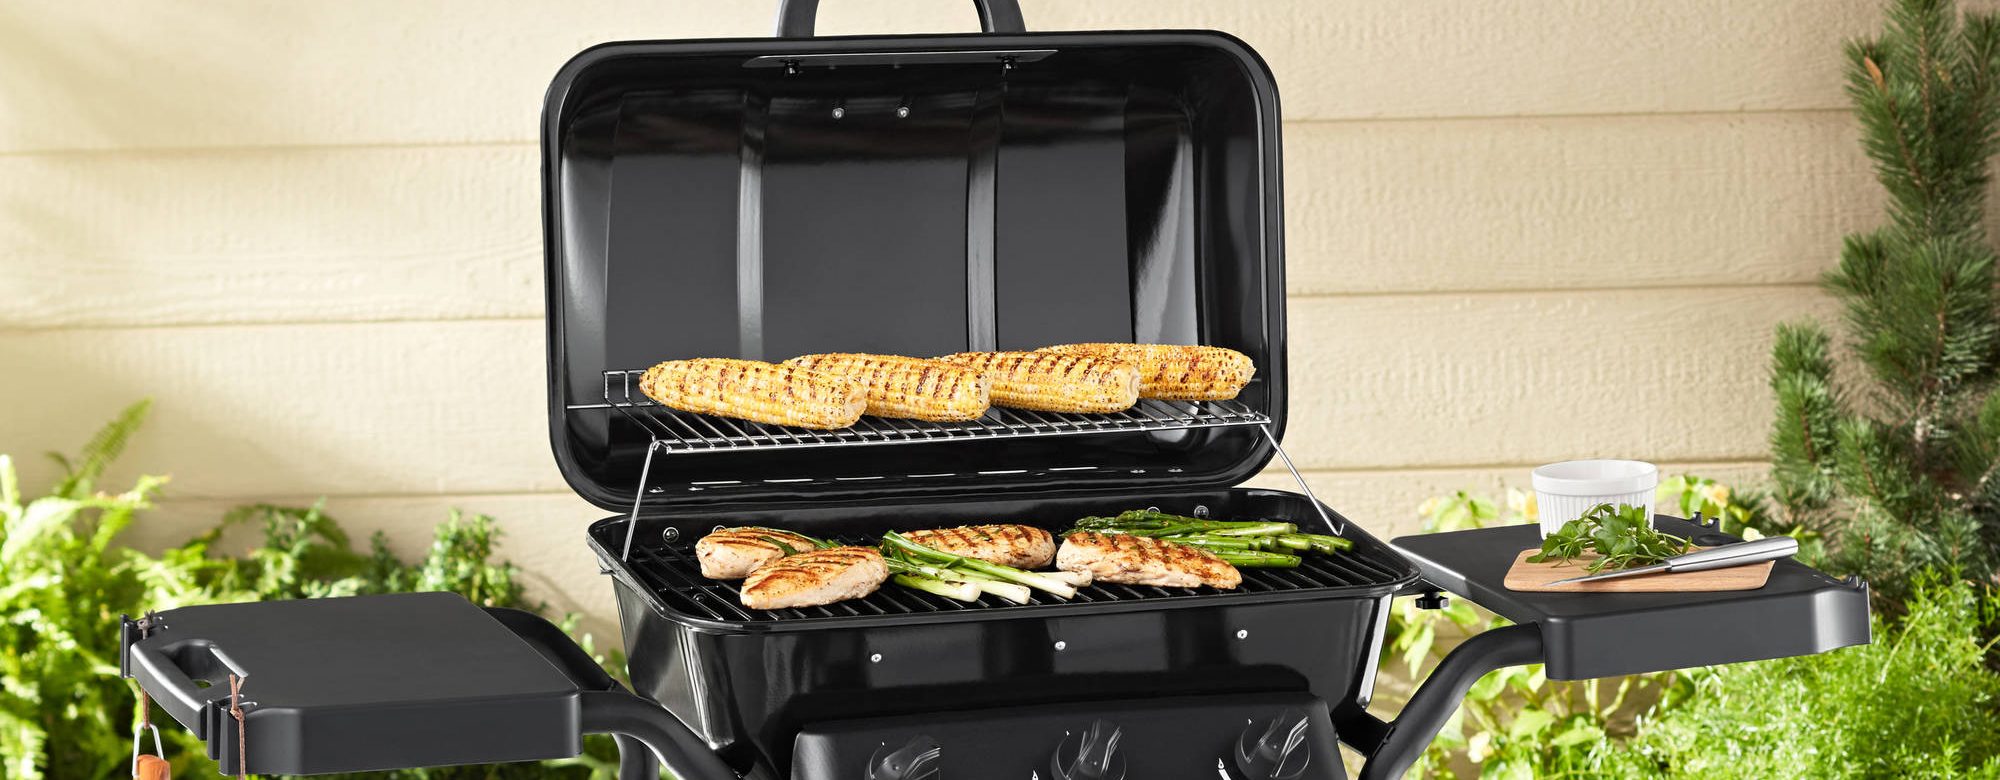 Expert Grill 3-burner gas grill for $64 in stores